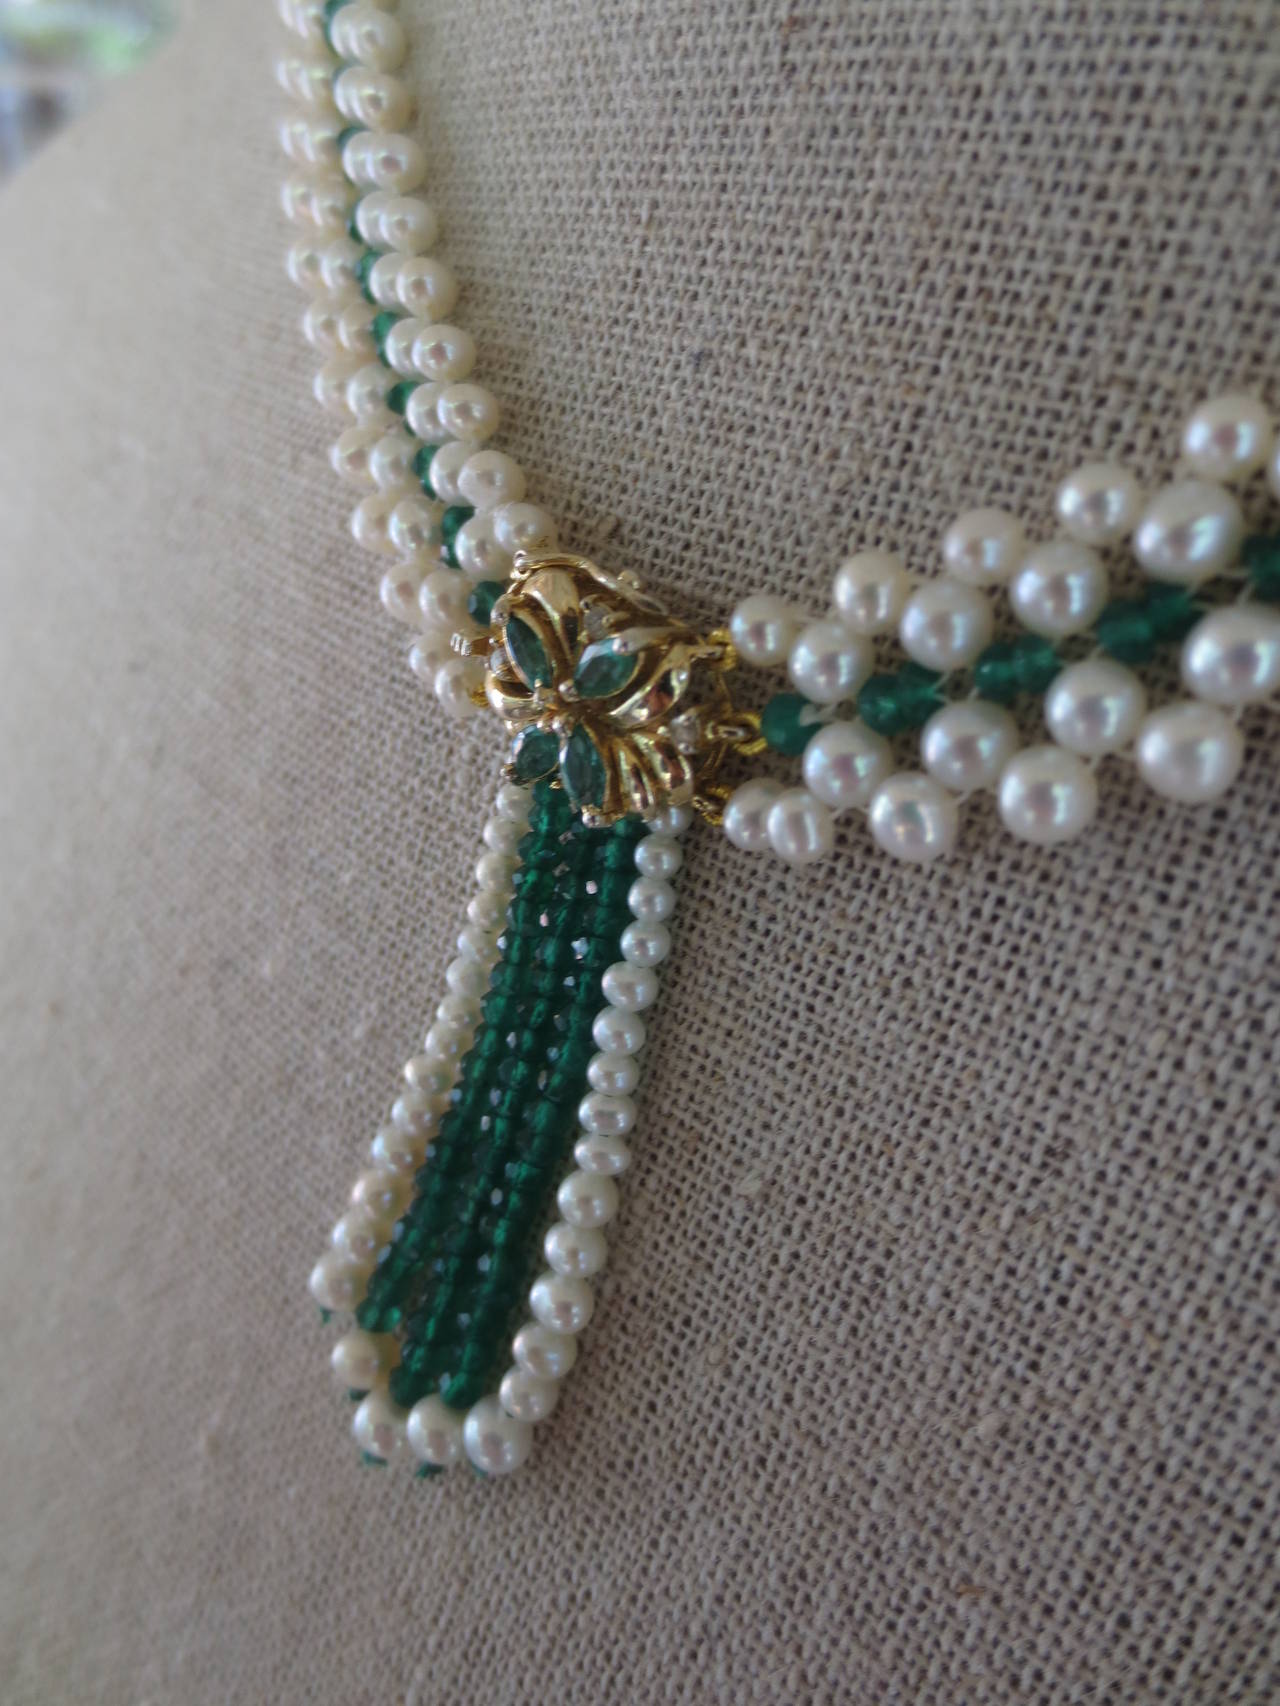 This handwoven pearl, emerald, and 14K yellow gold beaded necklace is accented by a beautiful centerpiece that also serves as the necklace's clasp. The floral centerpiece is made of 14 k yellow gold and accented with emerald stones and small